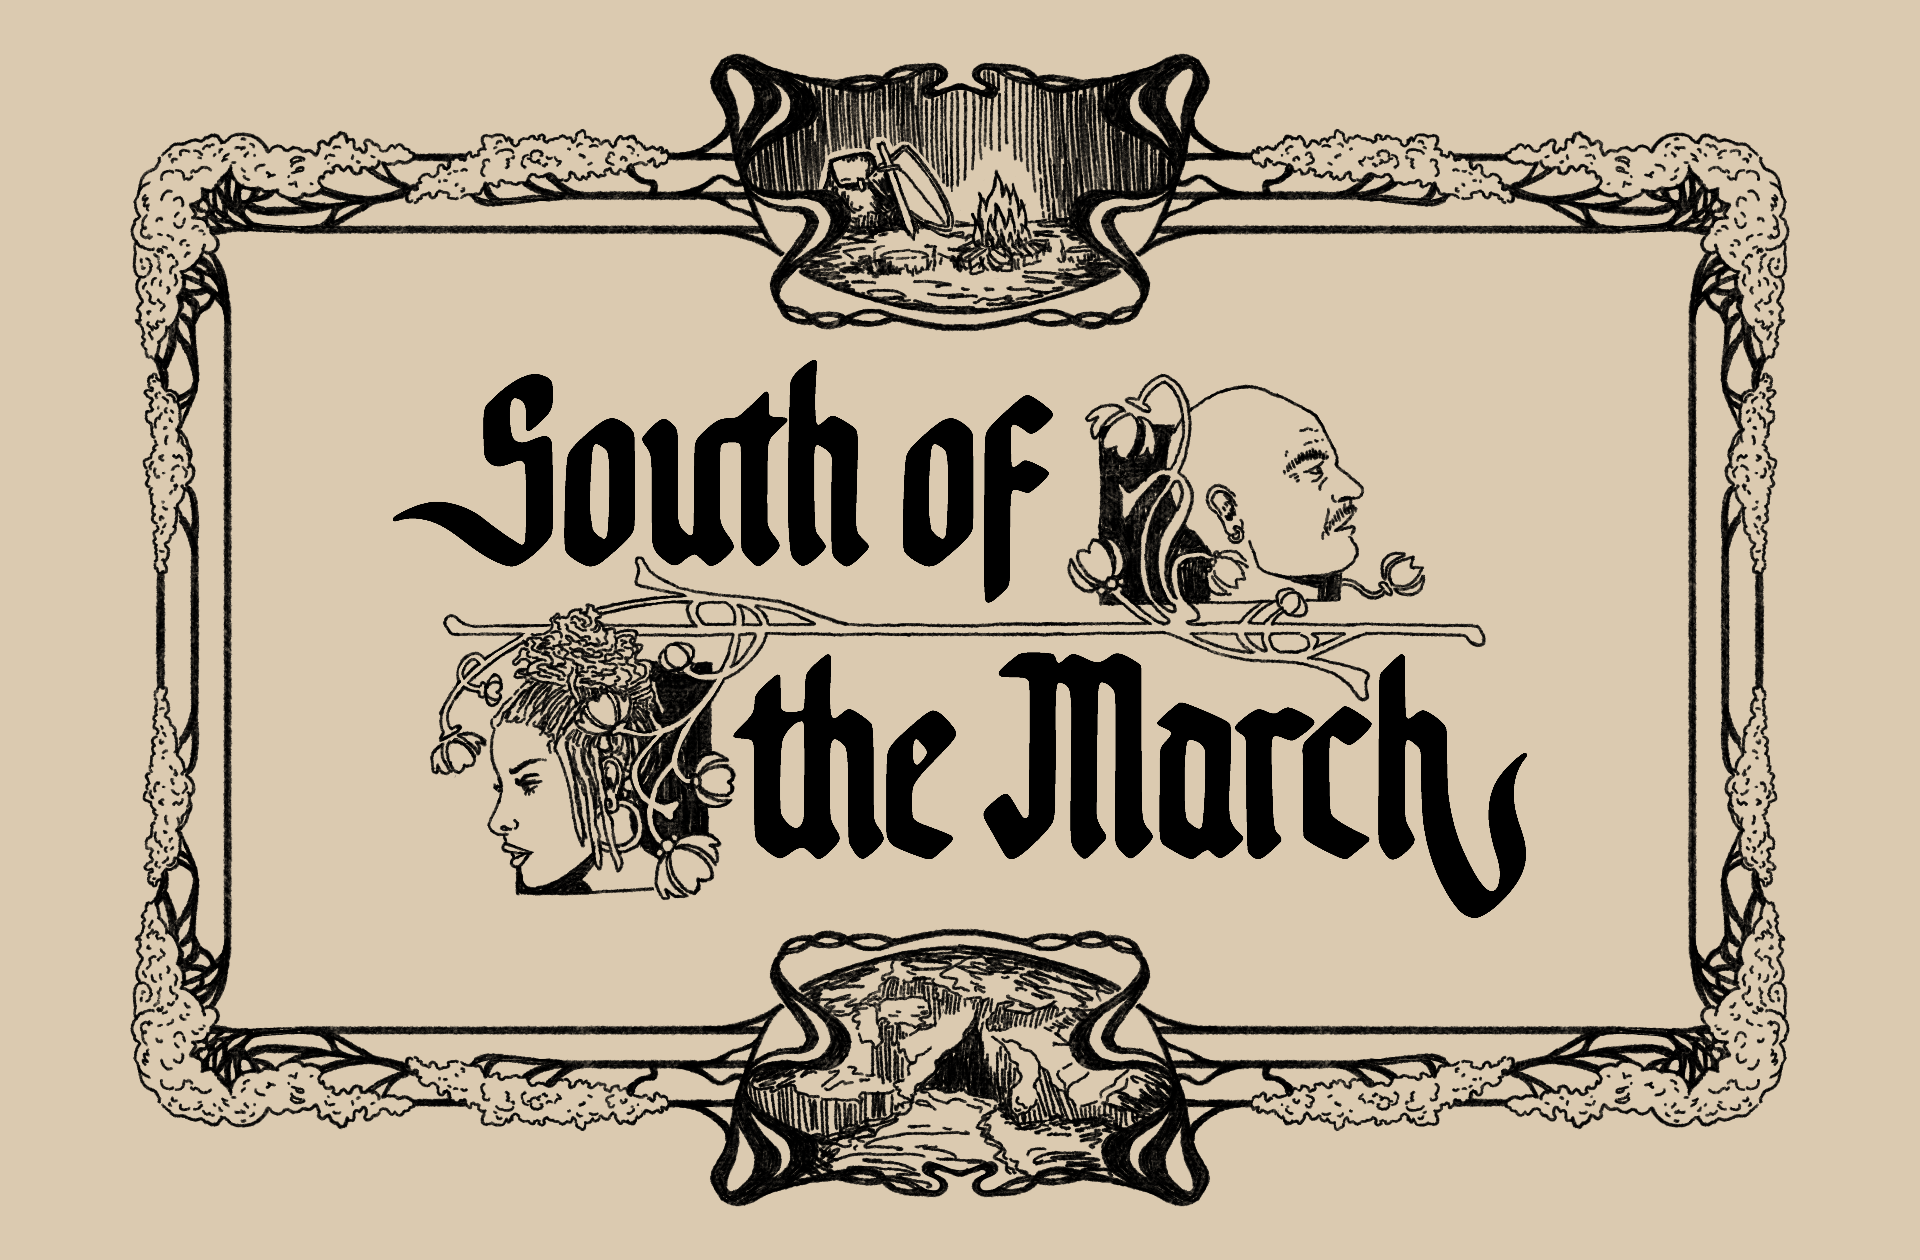 South of the March